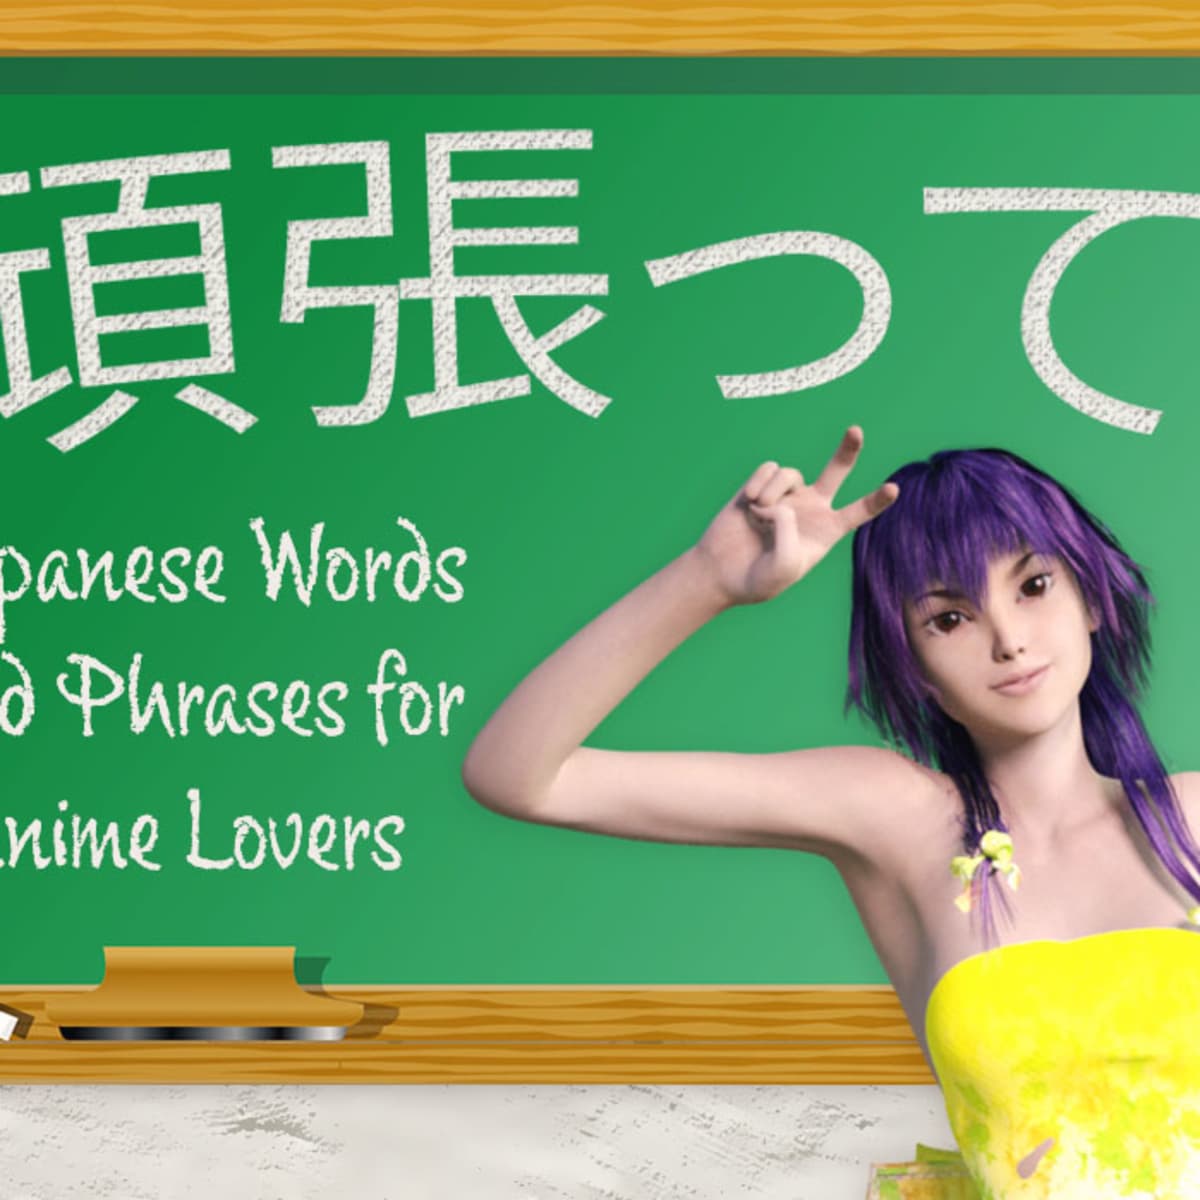 The Epic List of 250 Anime Words and Phrases (With Kanji!) - Owlcation